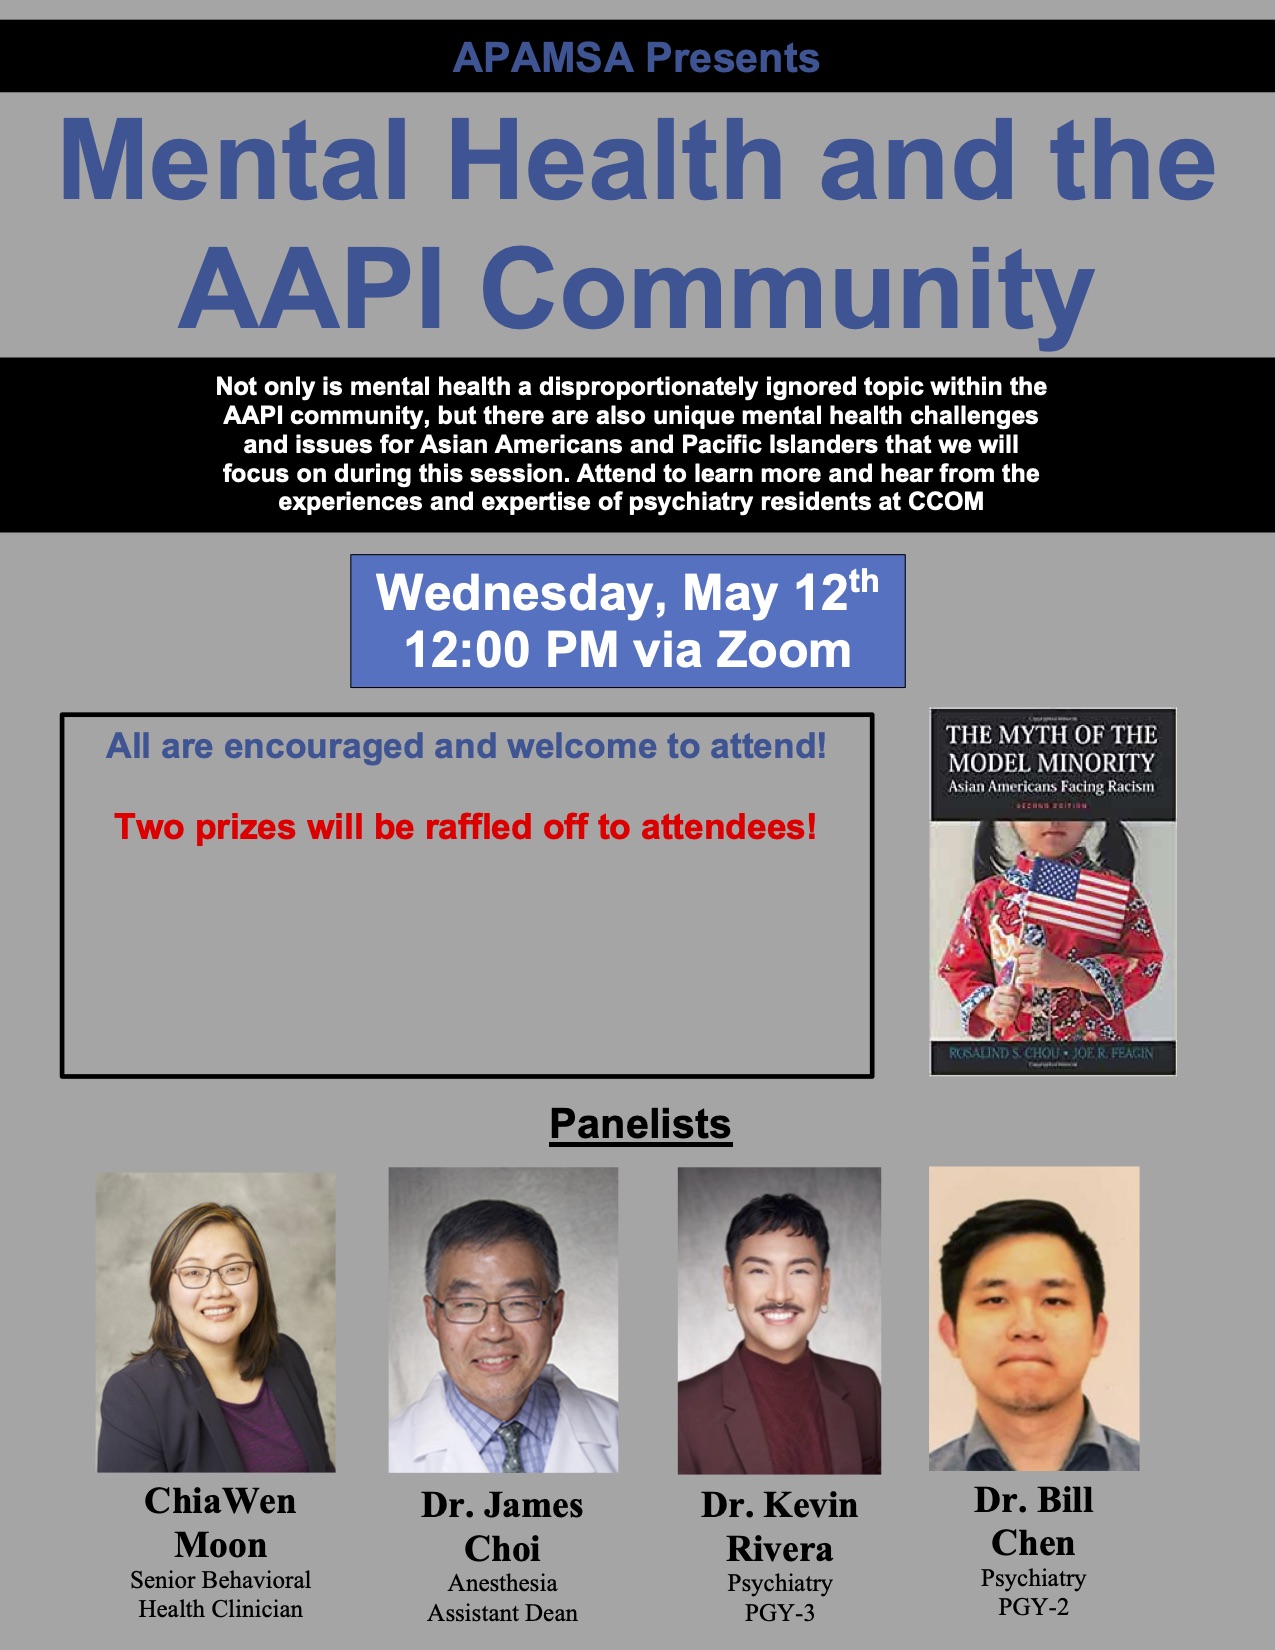 Mental Health and the AAPI Community promotional image